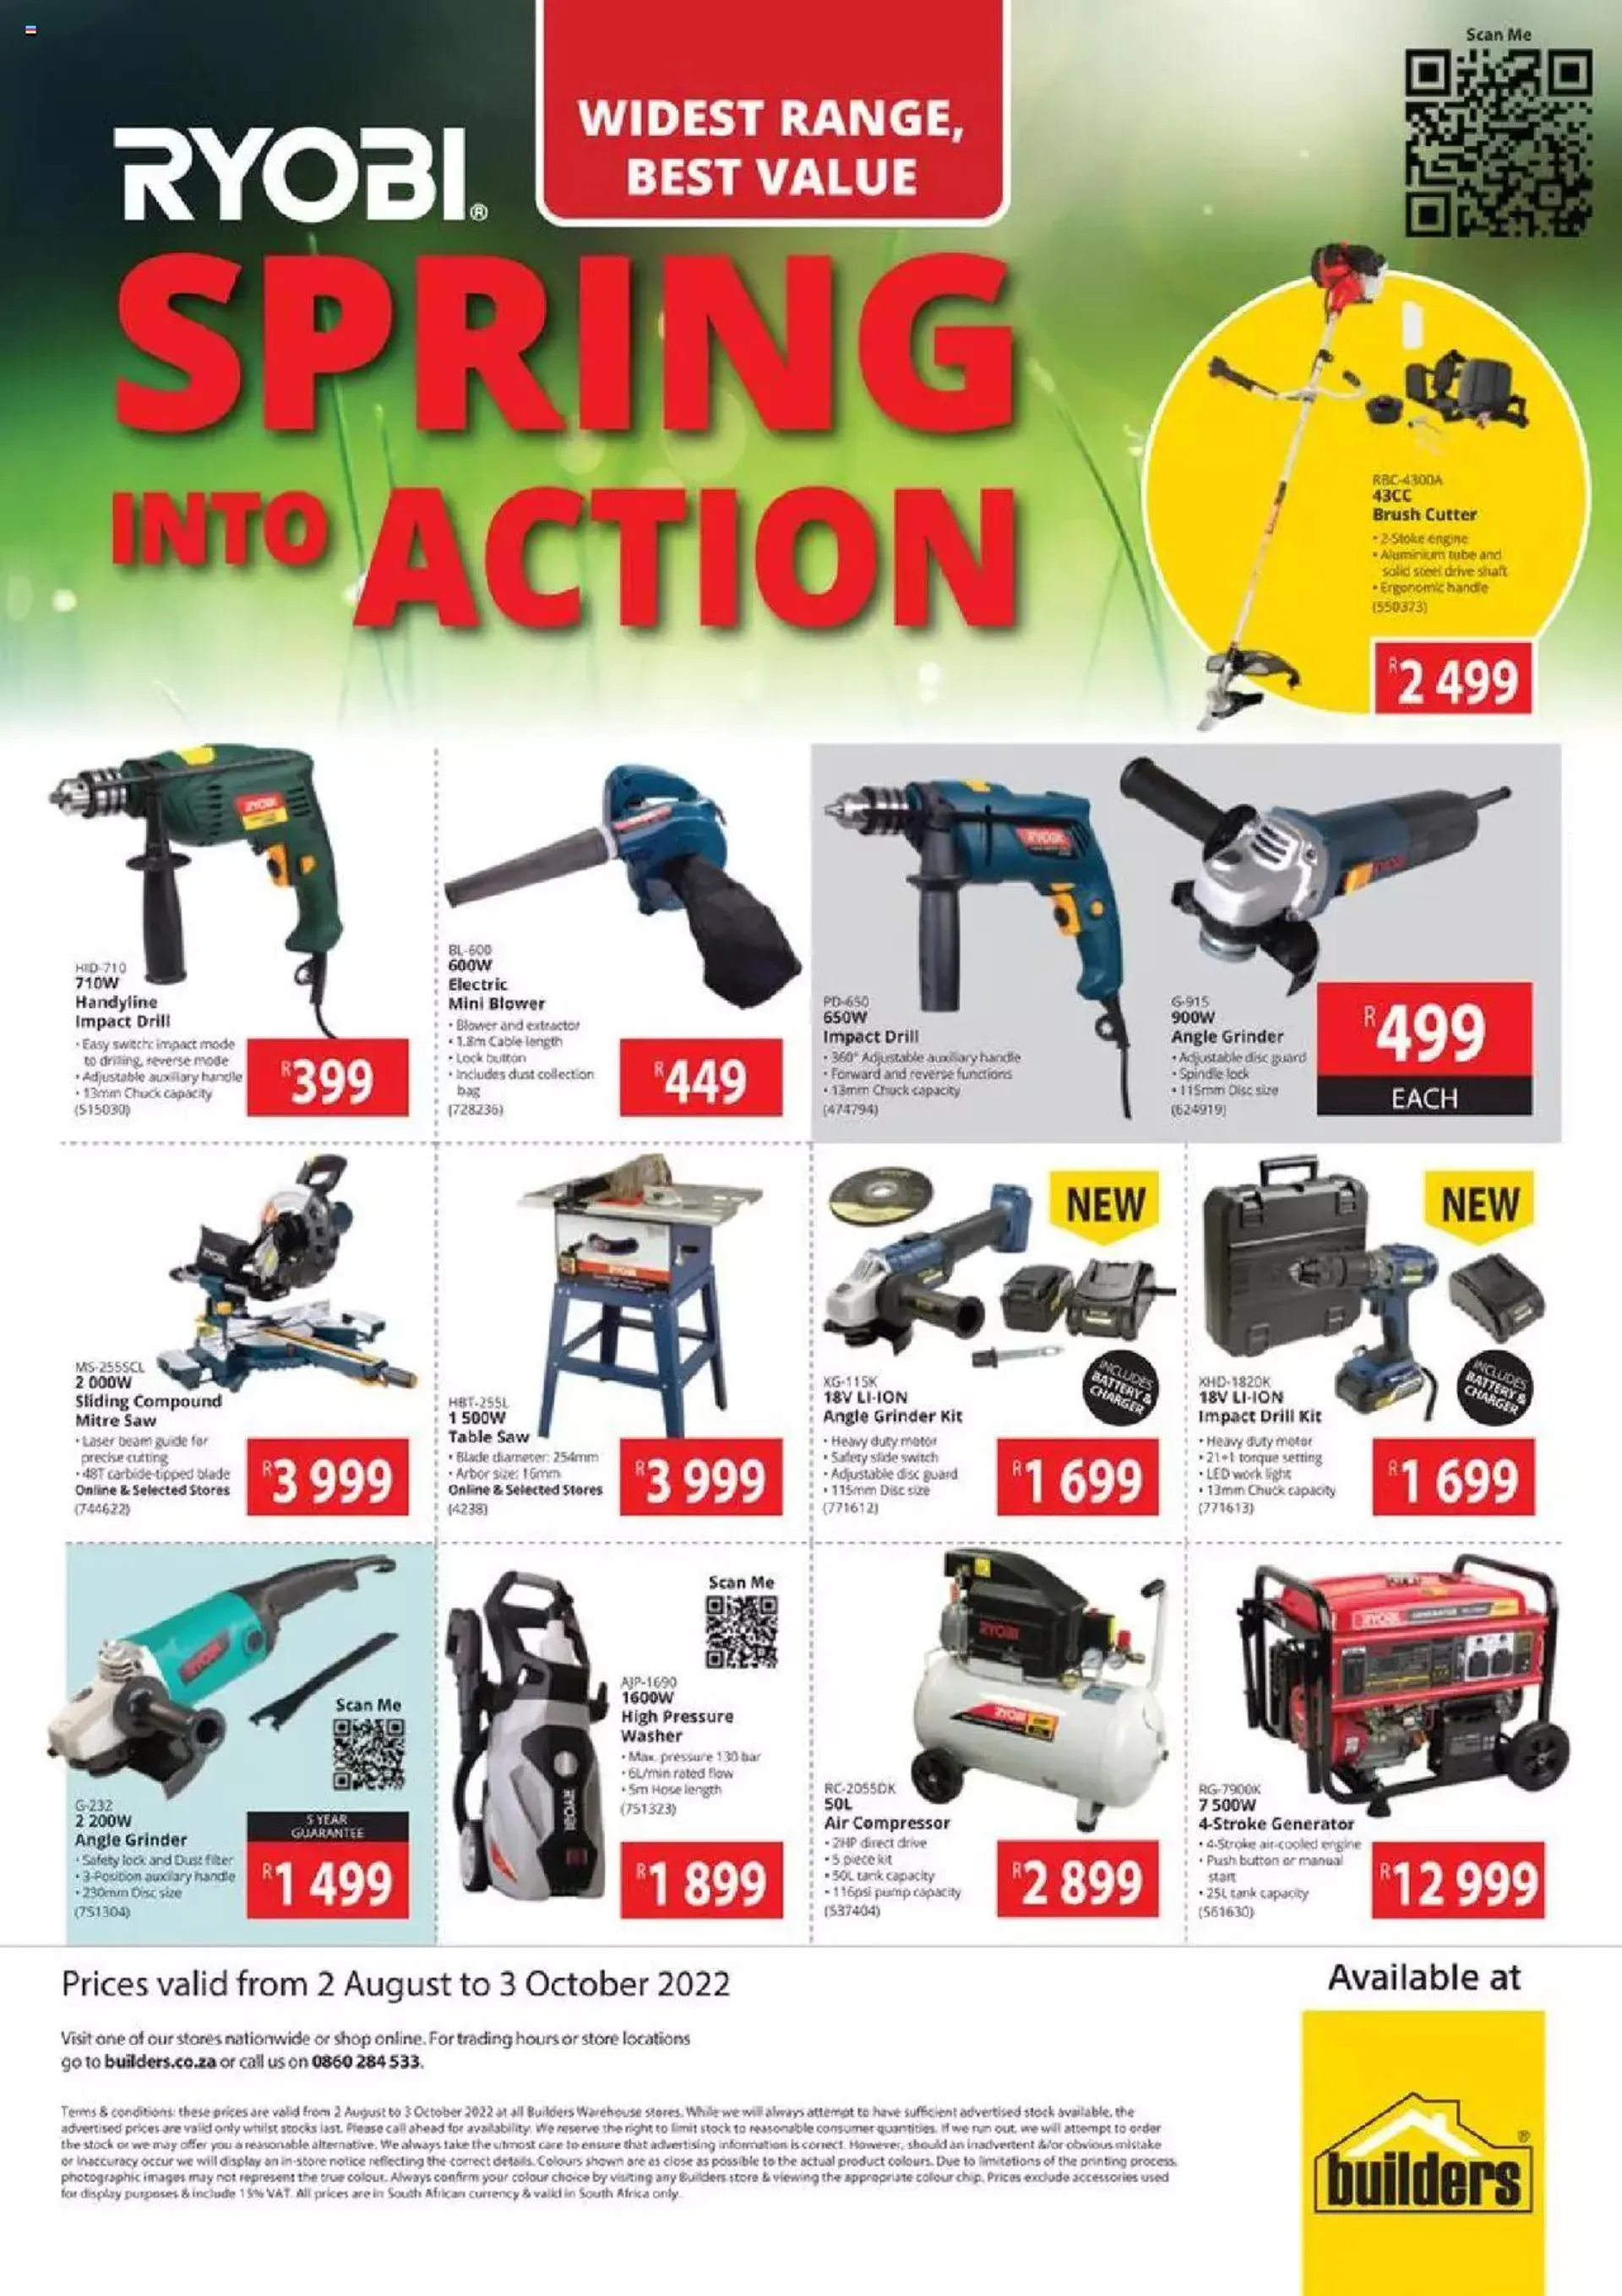 Builders - Spring Into Action - 0